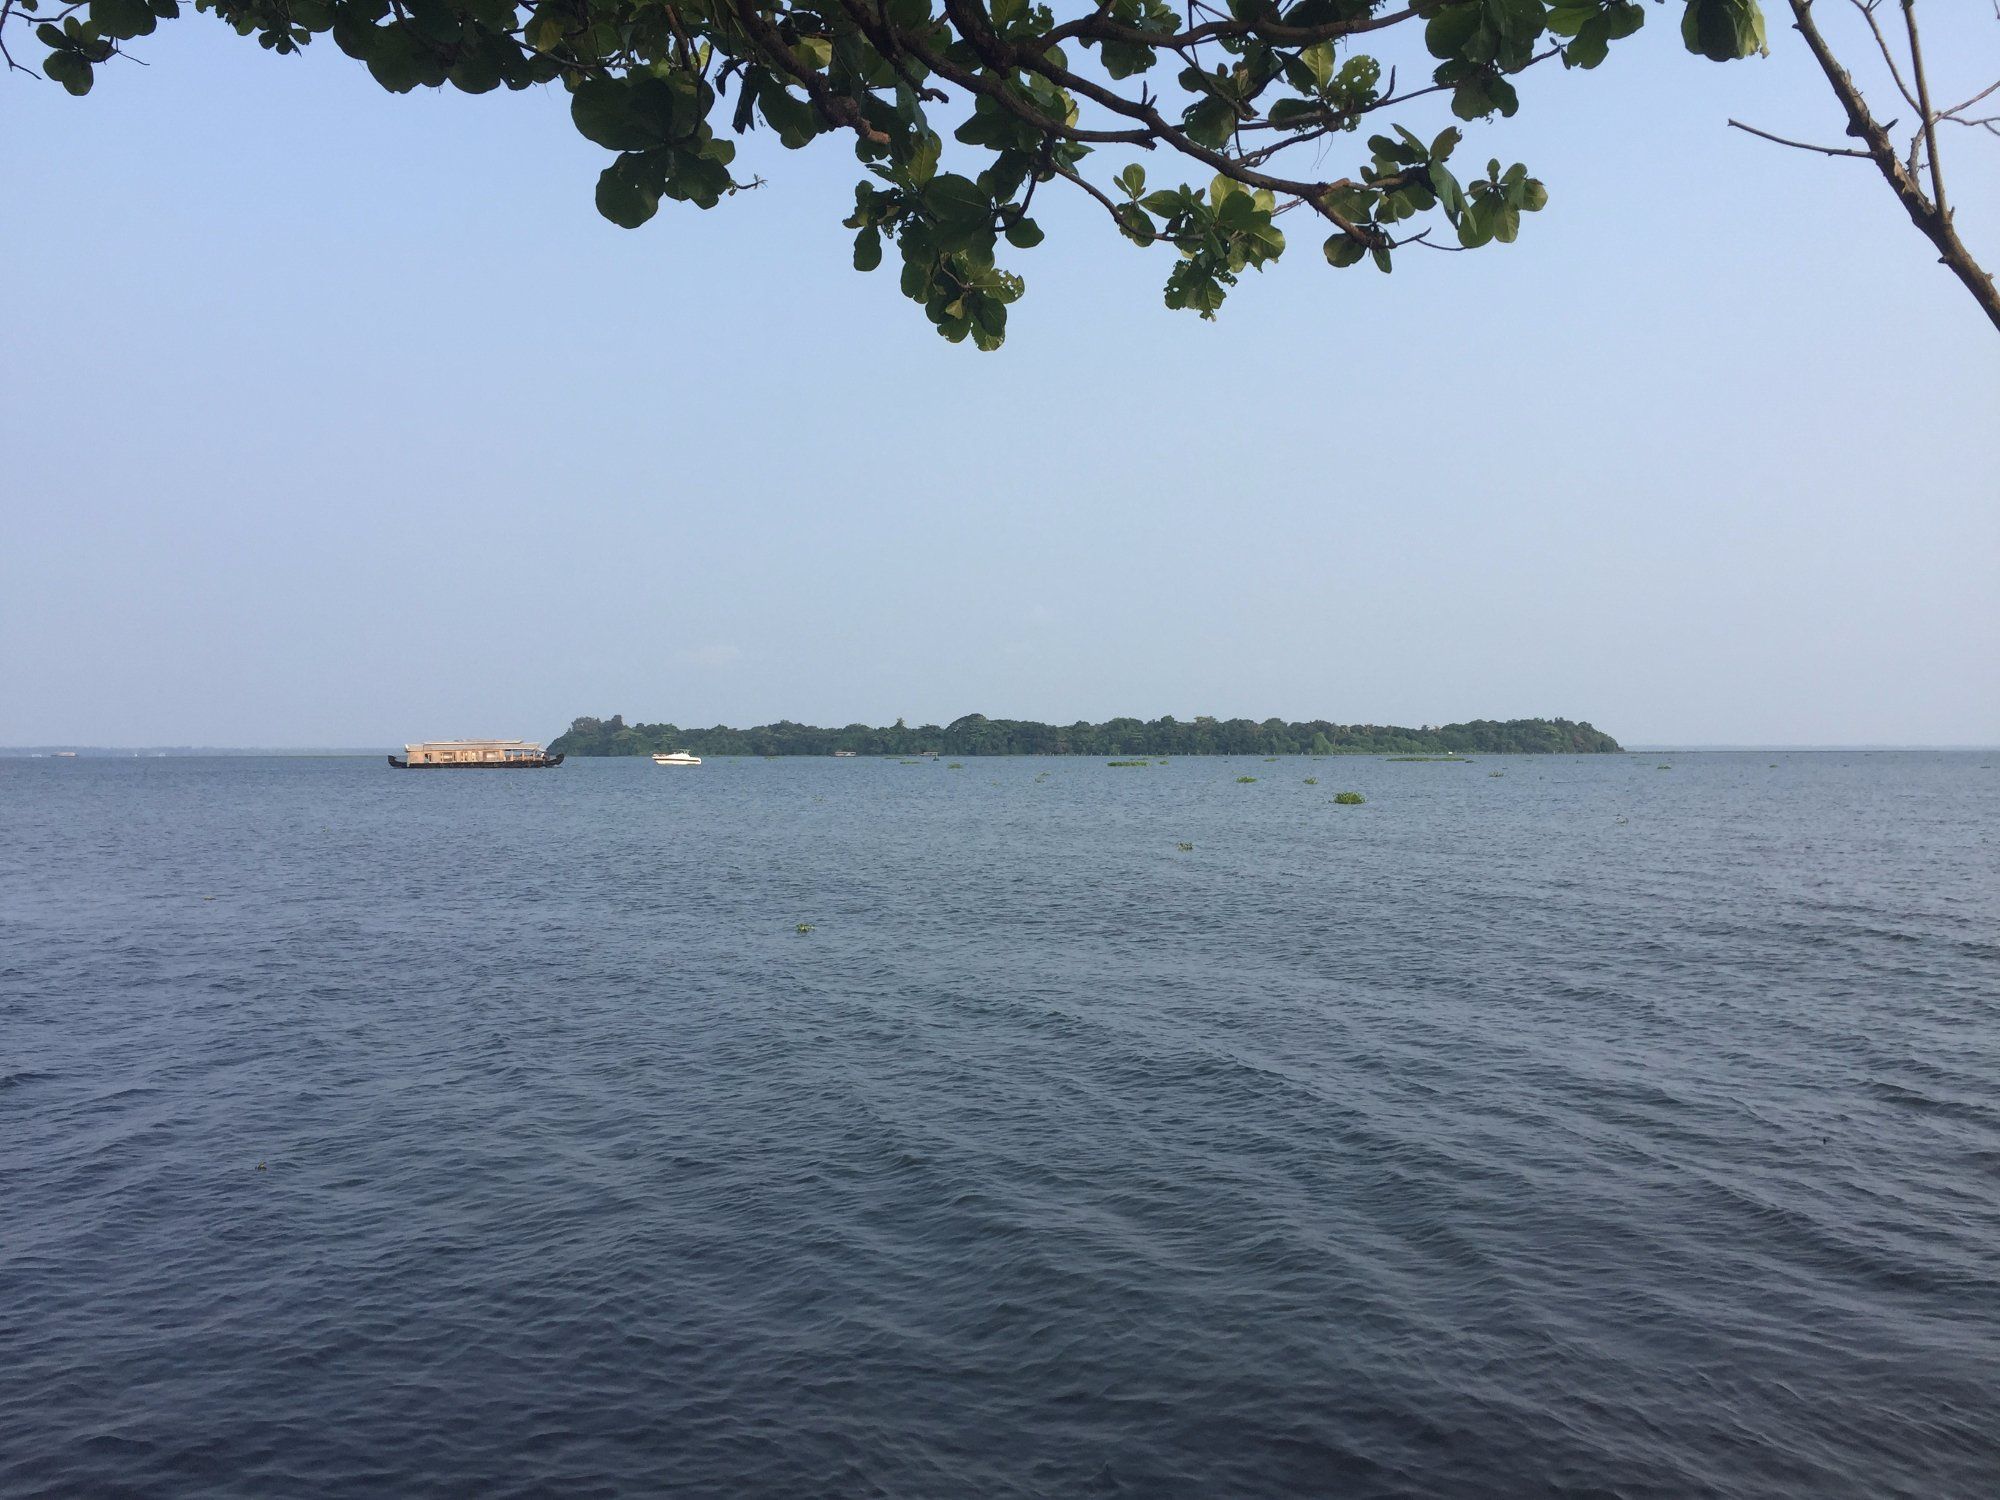 Pathiramanal Island- A lush green island in the middle of a lake ...